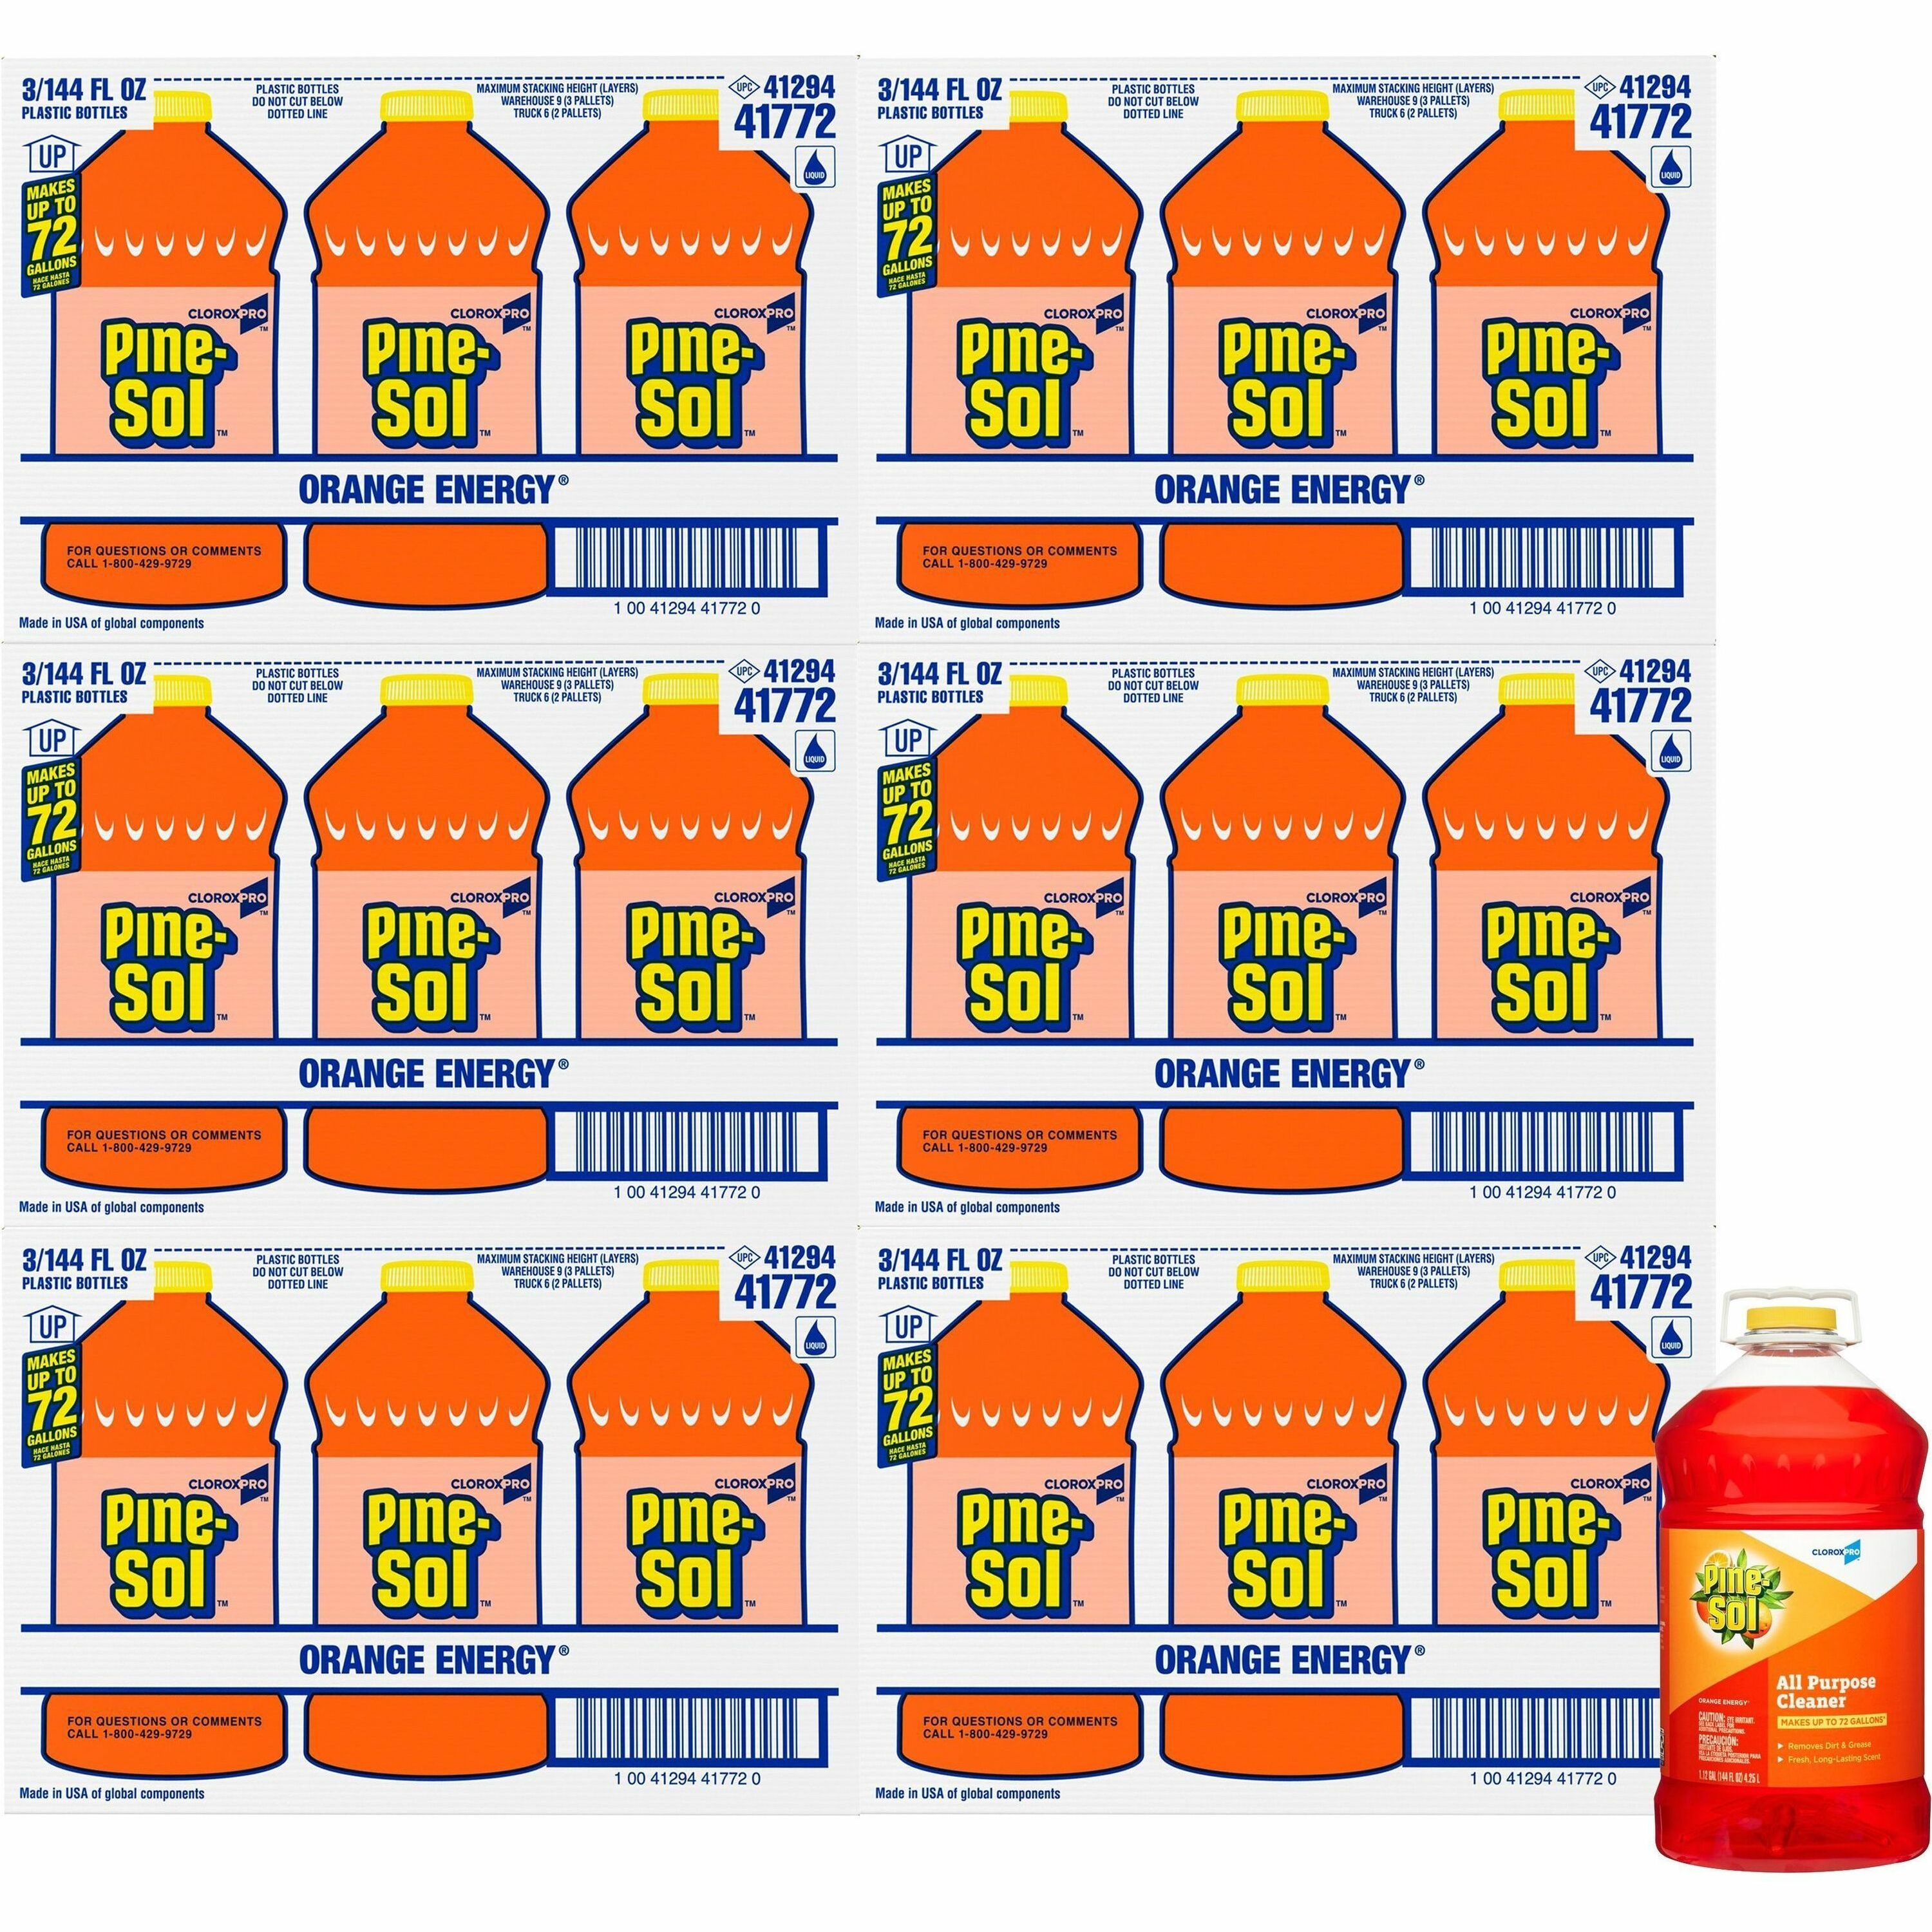 CloroxPro Pine-Sol All Purpose Cleaner - Concentrate - 144 fl oz (4.5 quart) - Orange Energy Scent - 126 / Pallet - Water Soluble, Deodorize, Residue-free, Antibacterial - Orange - 1